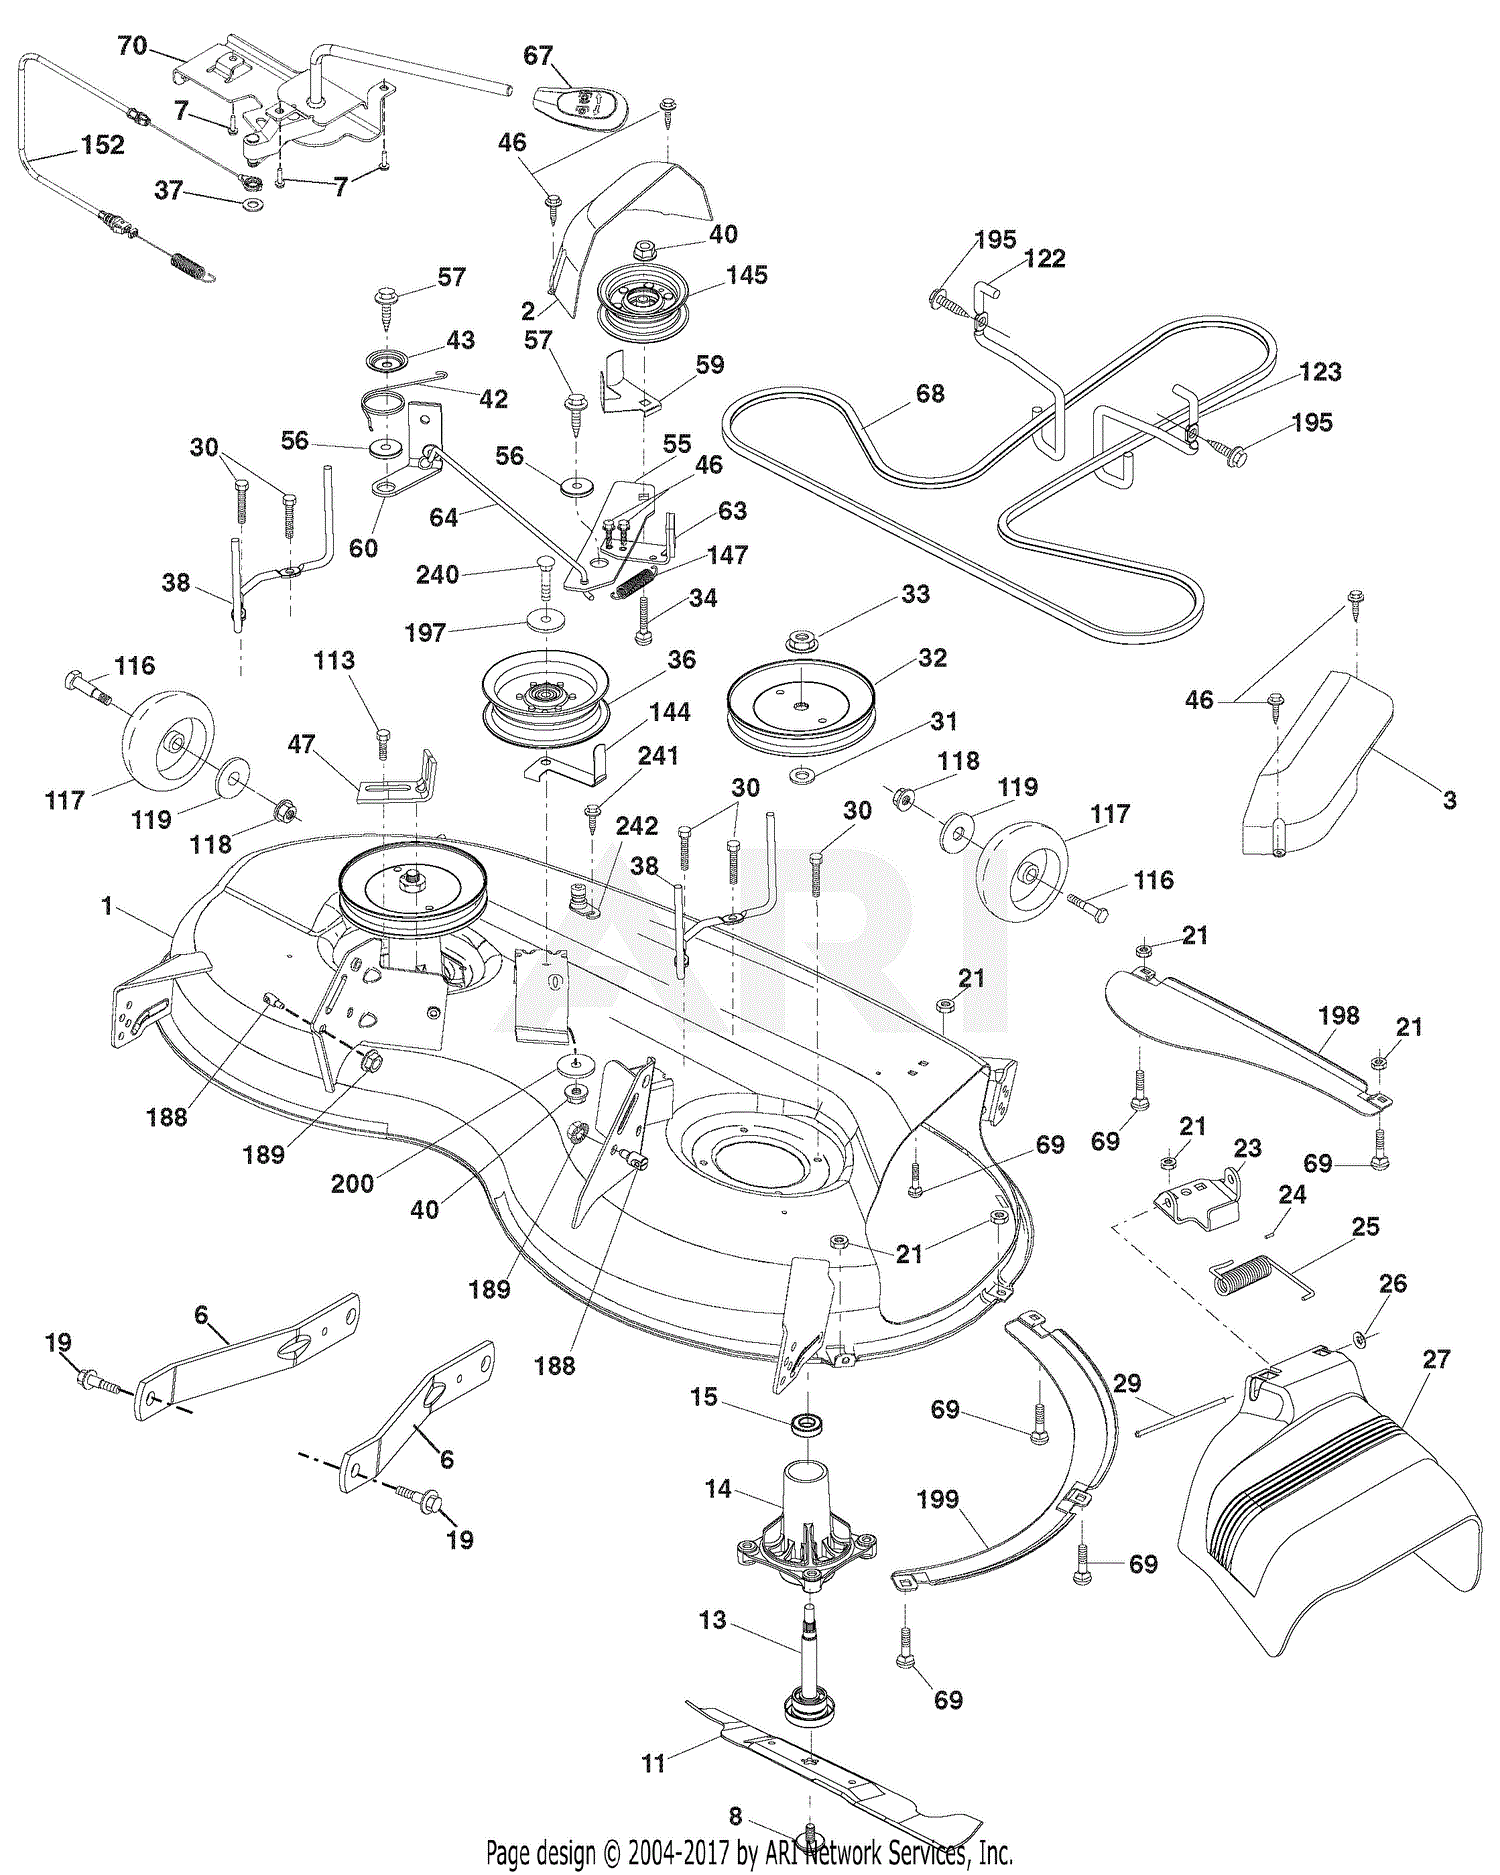 Parts Of A Riding Lawn Mower | chegos.pl